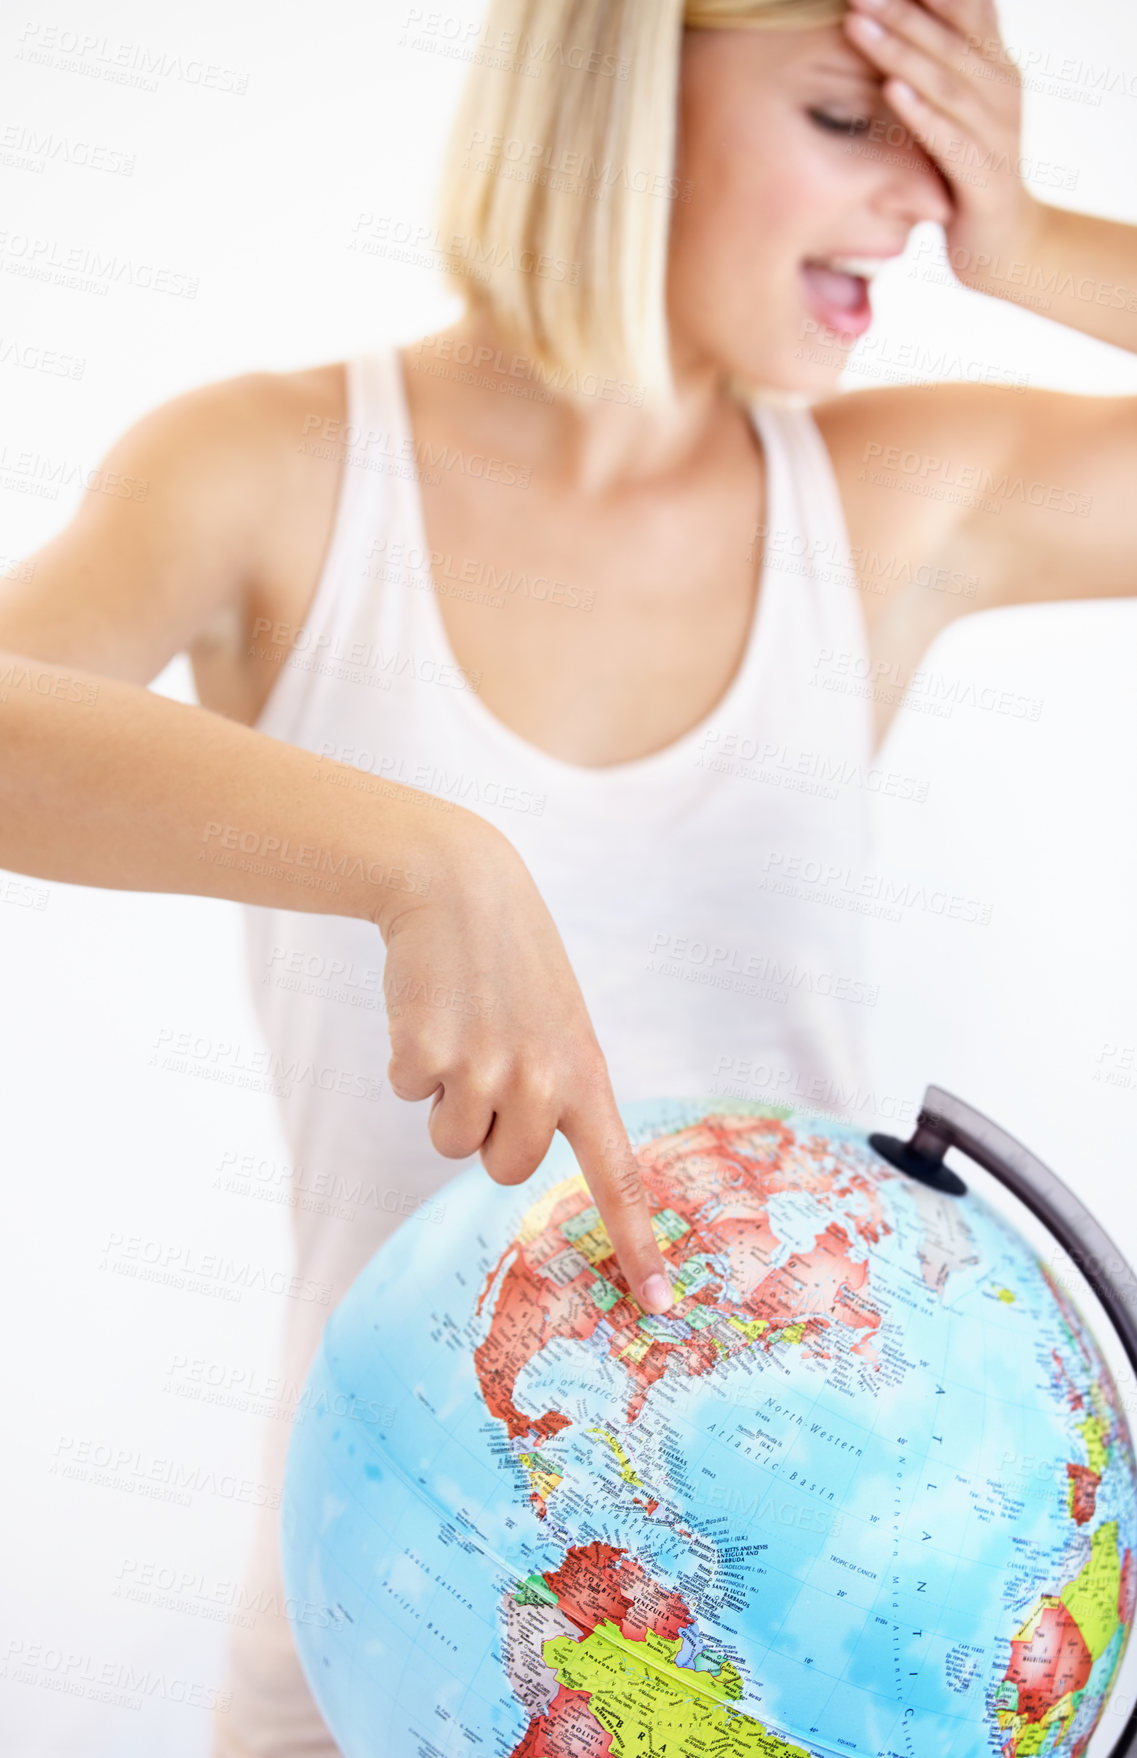 Buy stock photo A pretty young woman covering her eyes and pointing at her next destination on a globe